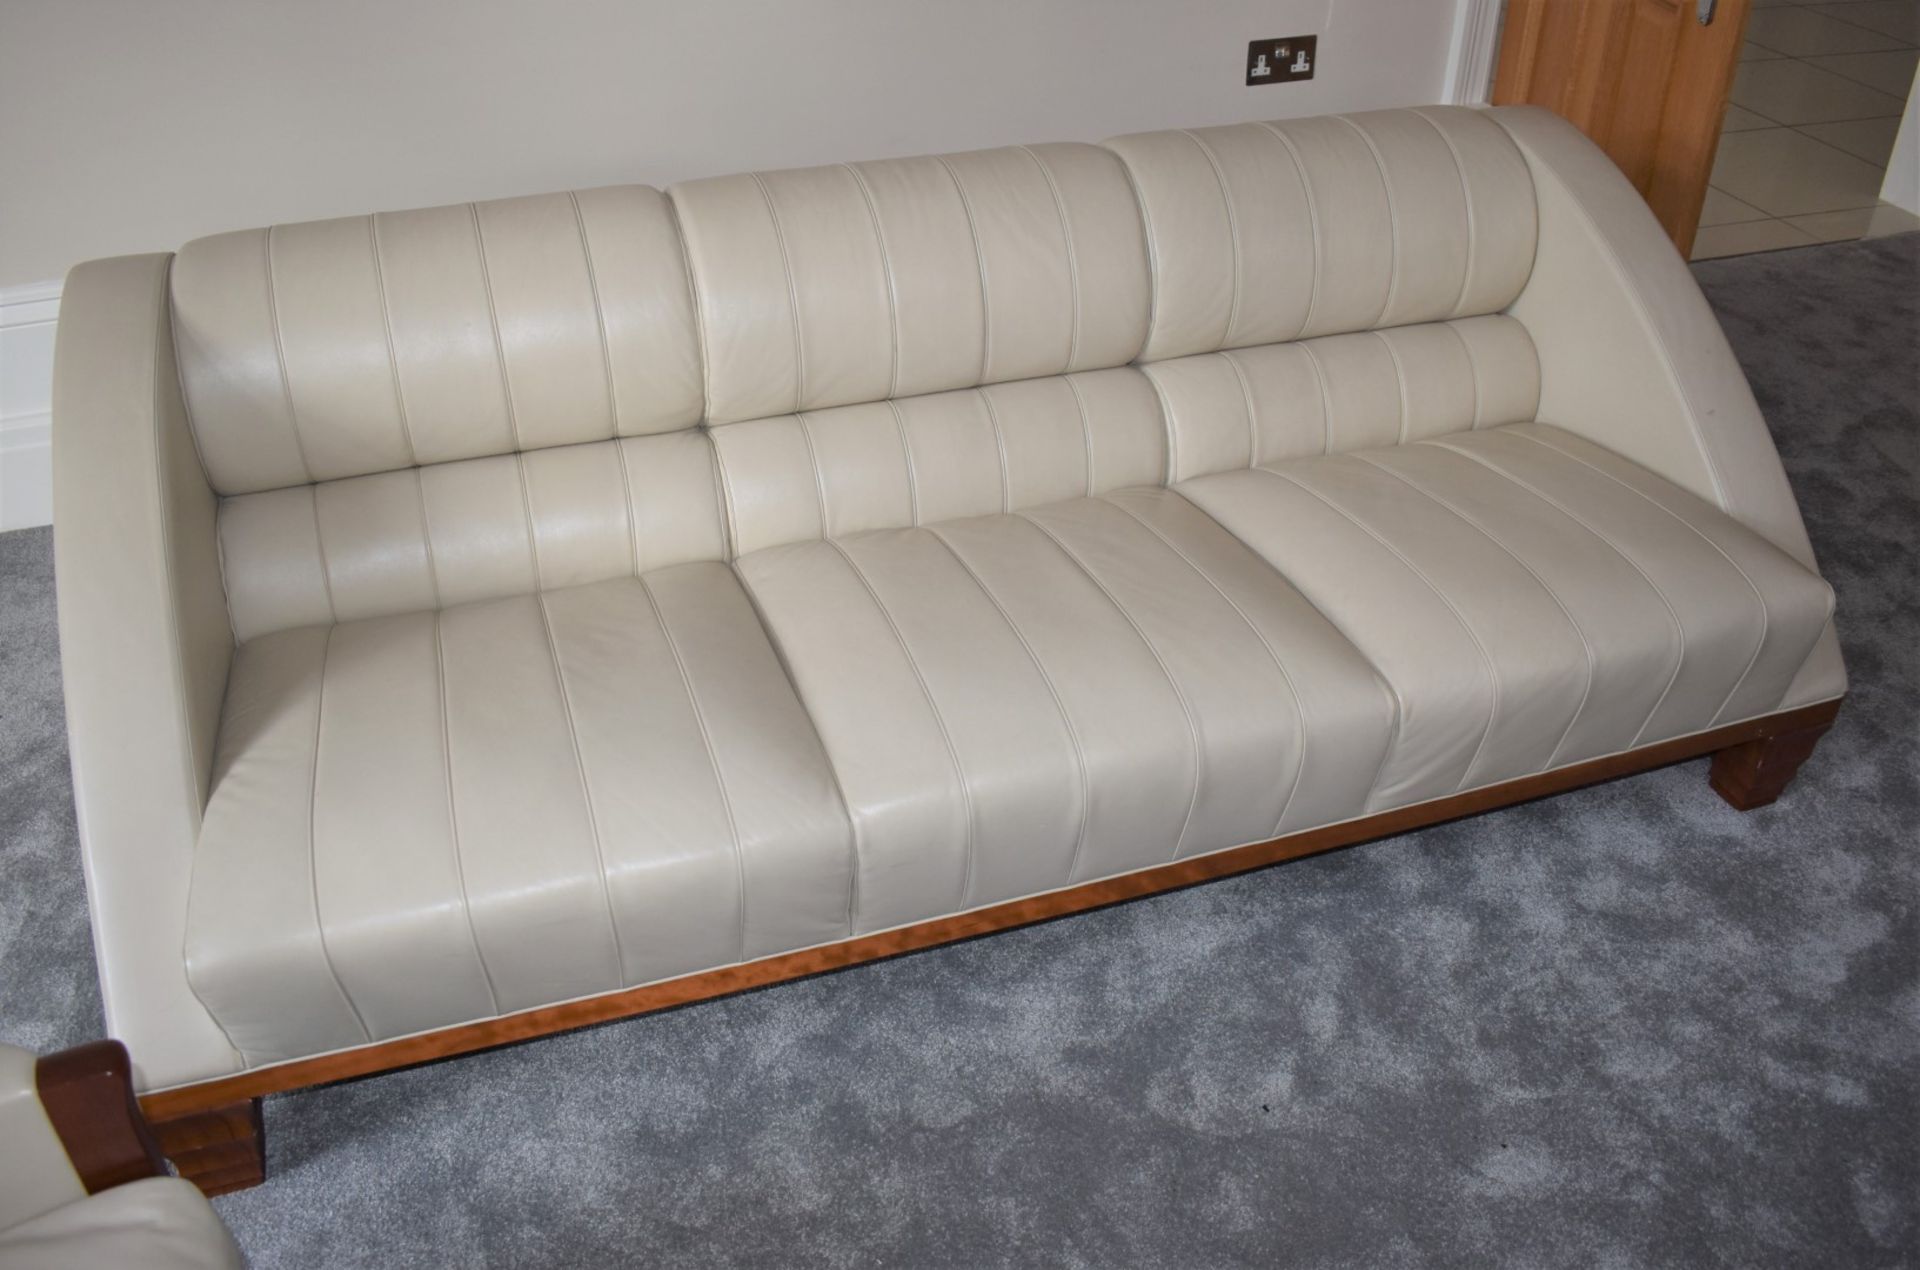 1 x Giorgetti Aries Three Seater Leather Sofa - Designed by Leon Krier - Contemporary Sofa - Image 5 of 10